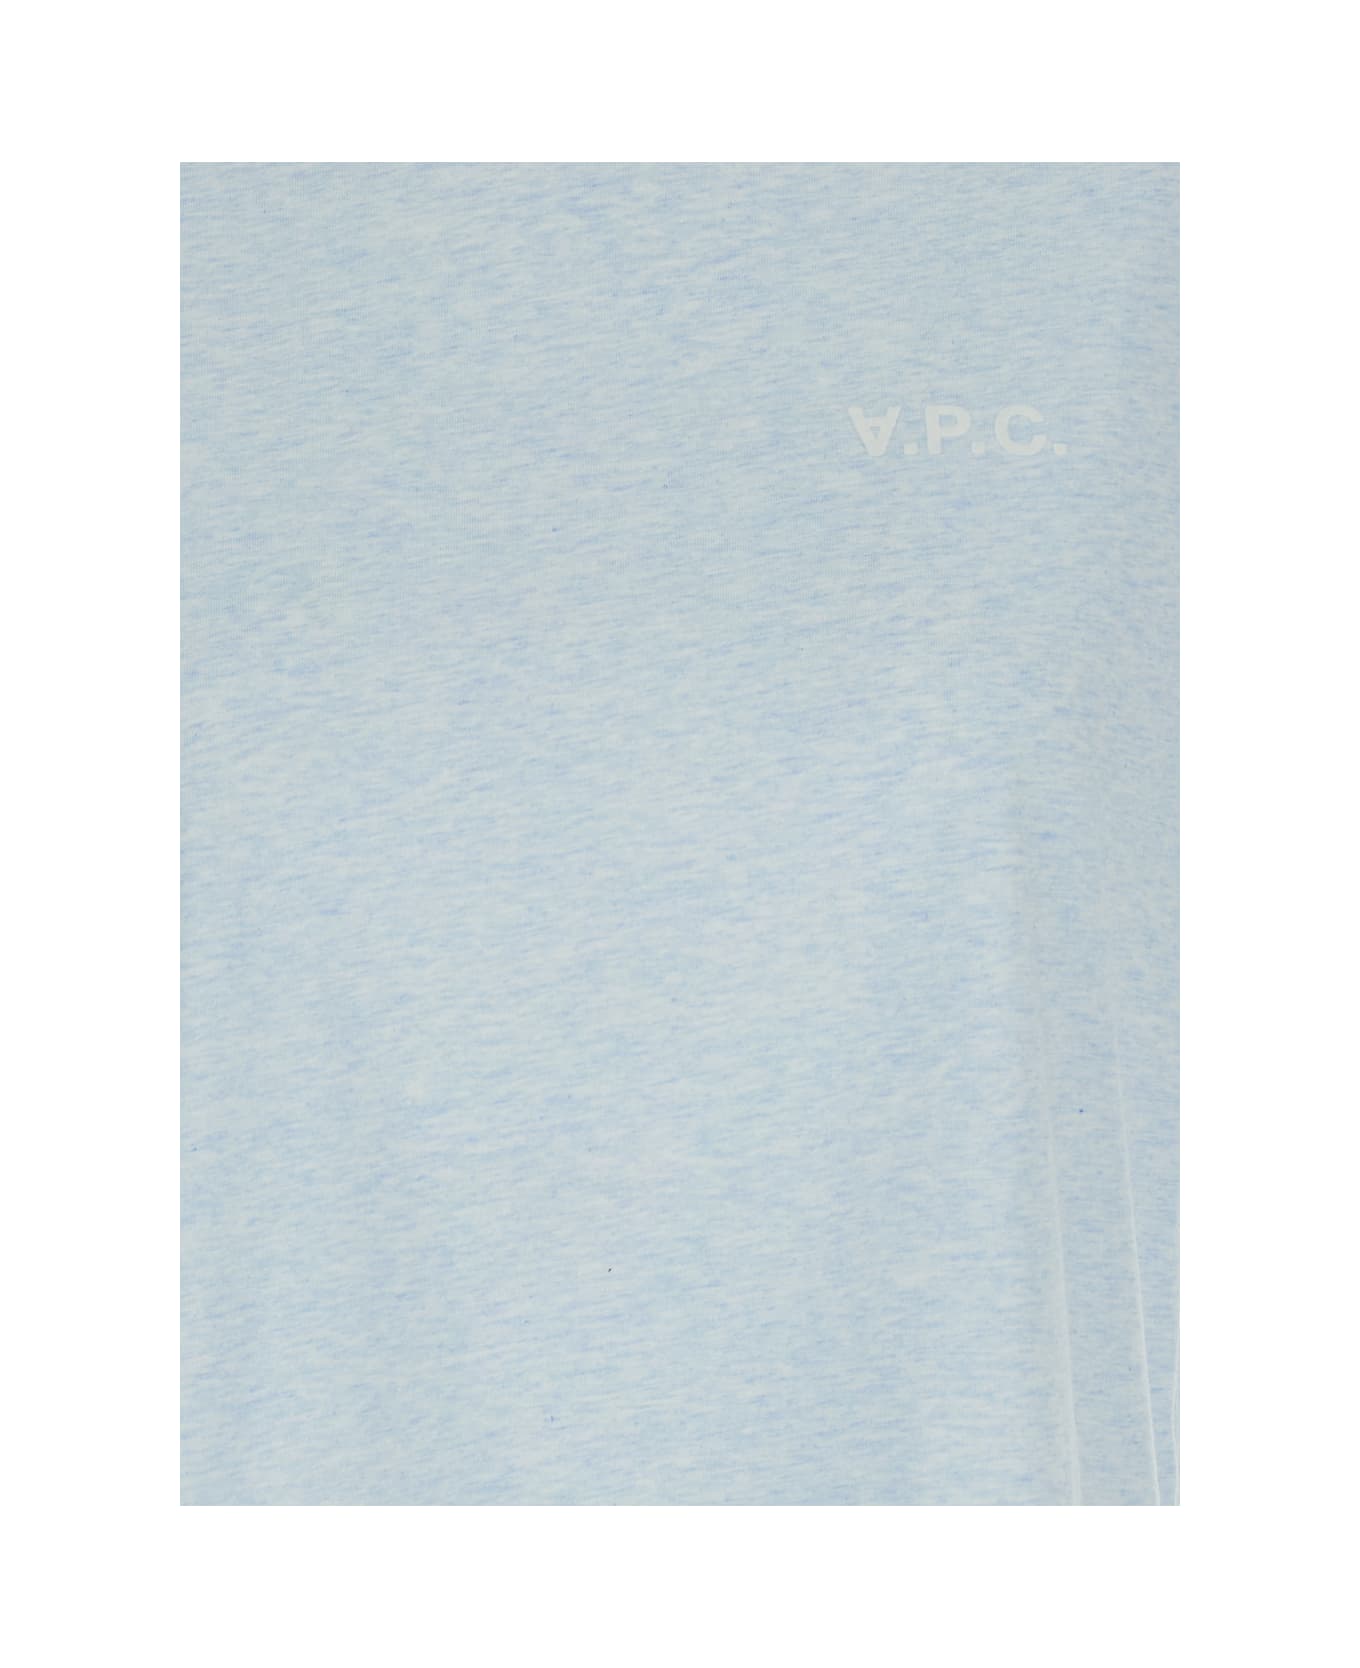 A.P.C. Round Neck T-shirt With Printed Logo In Cotton - Light blue